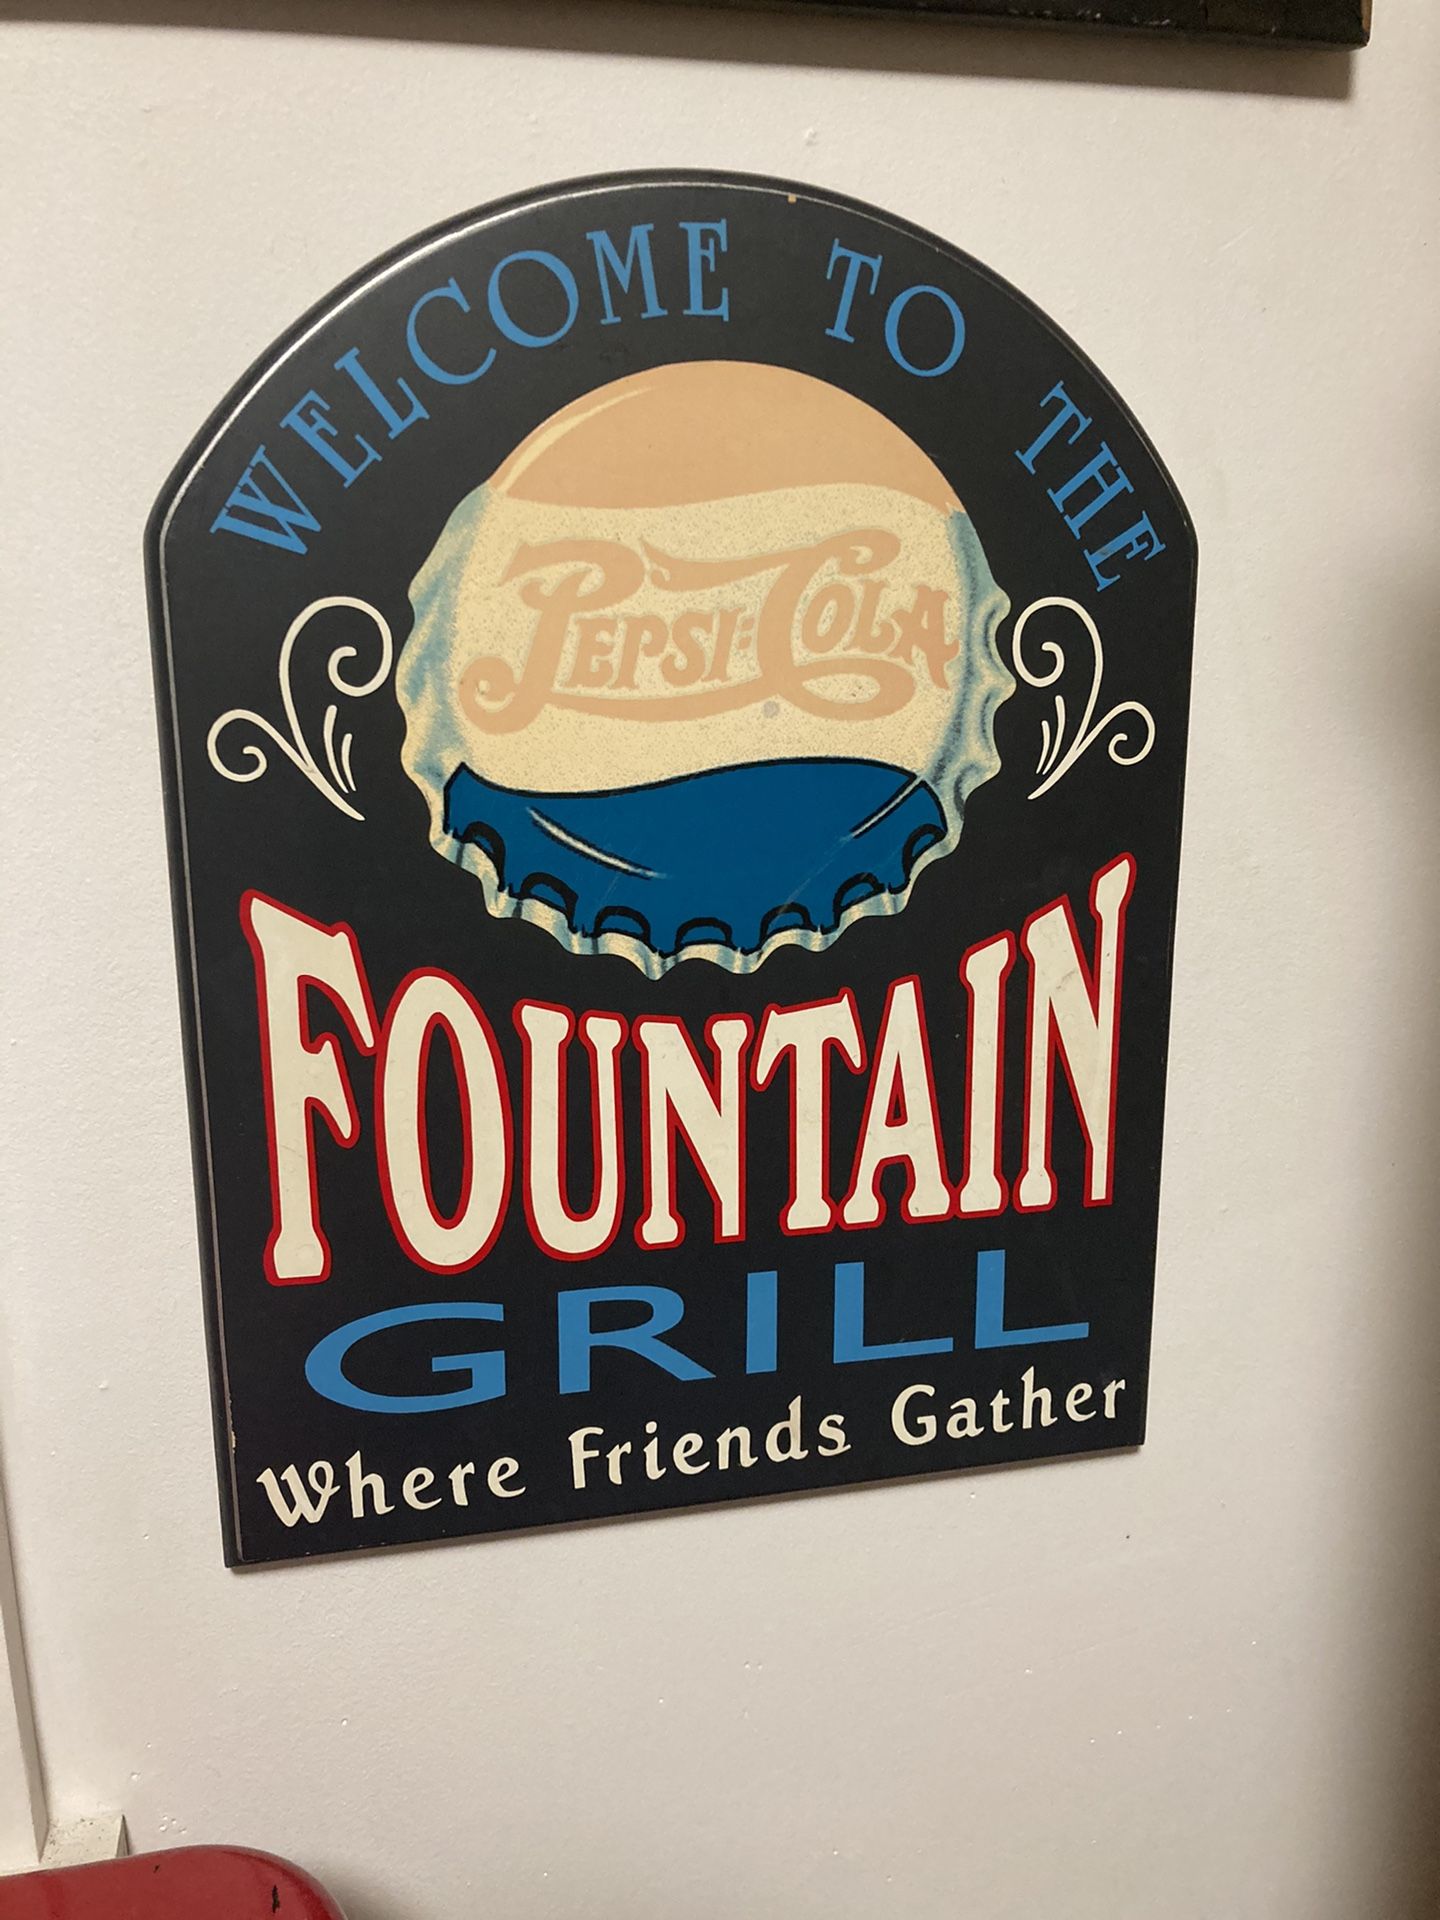 Welcome To The Fountain Grill Where Friends Gather Wall Decor